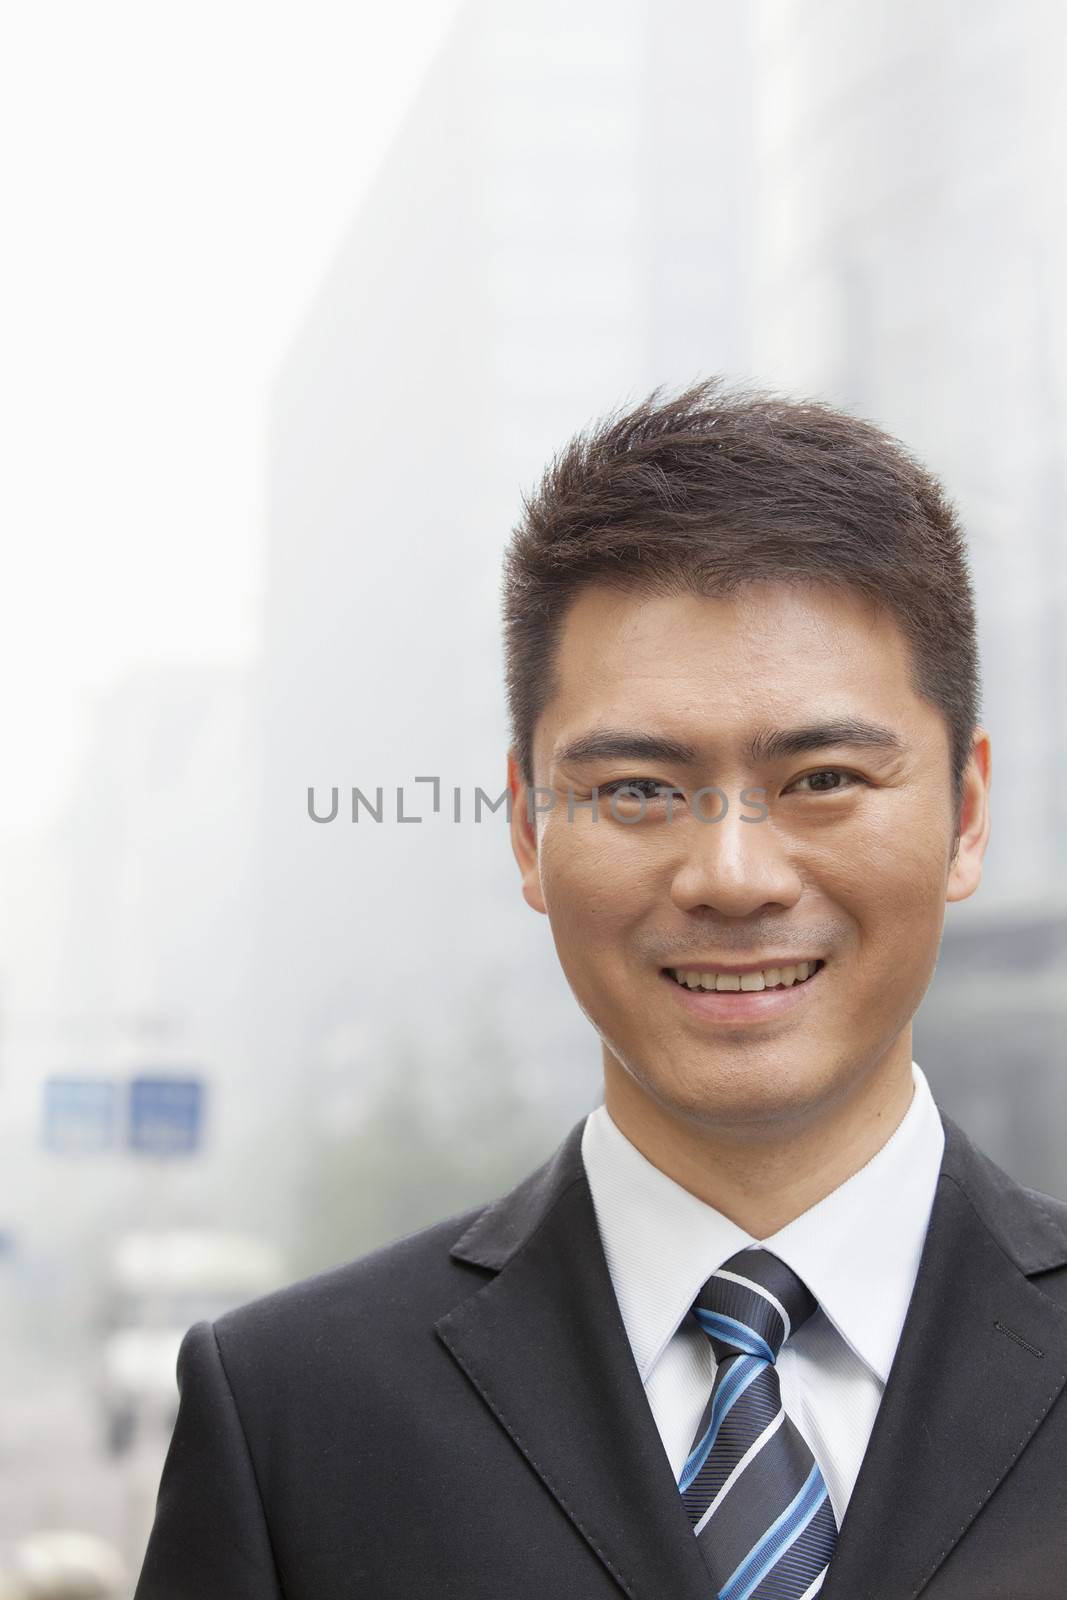 Young Businessman Smiling and Looking into Camera, Portrait